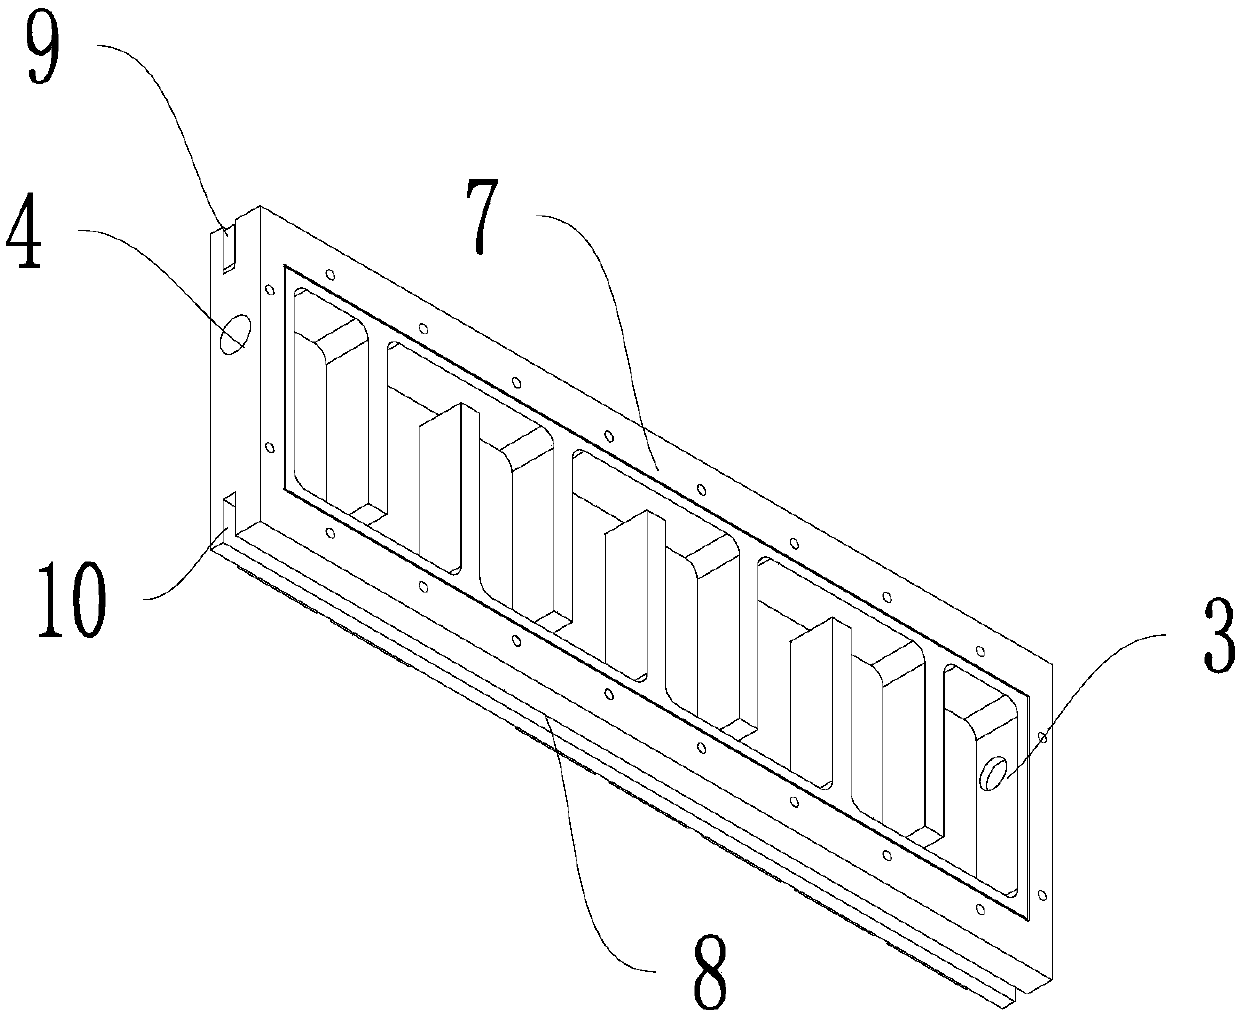 Water-cooled radiator and heat-dissipating system